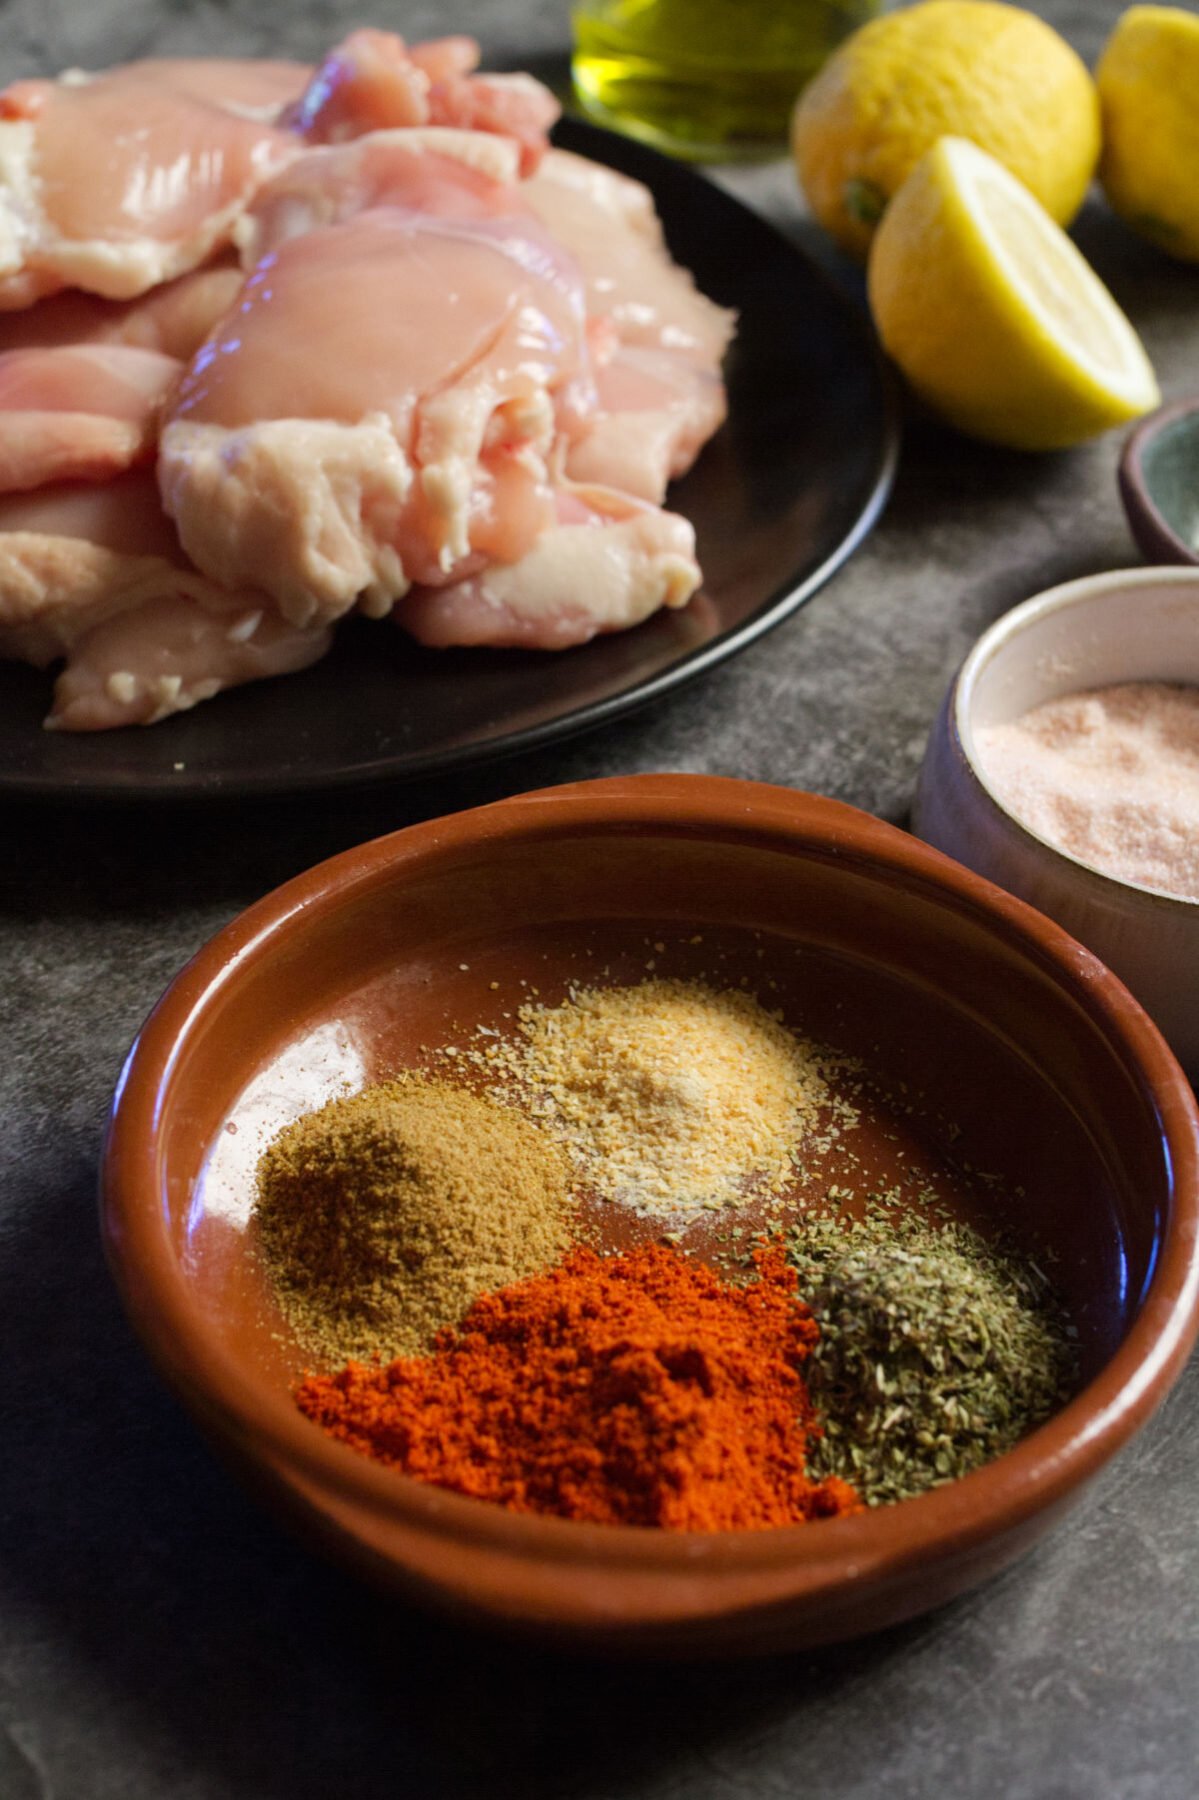 A bowl of spices sits beside some uncooked chicken thighs, lemon, and fresh parsley.